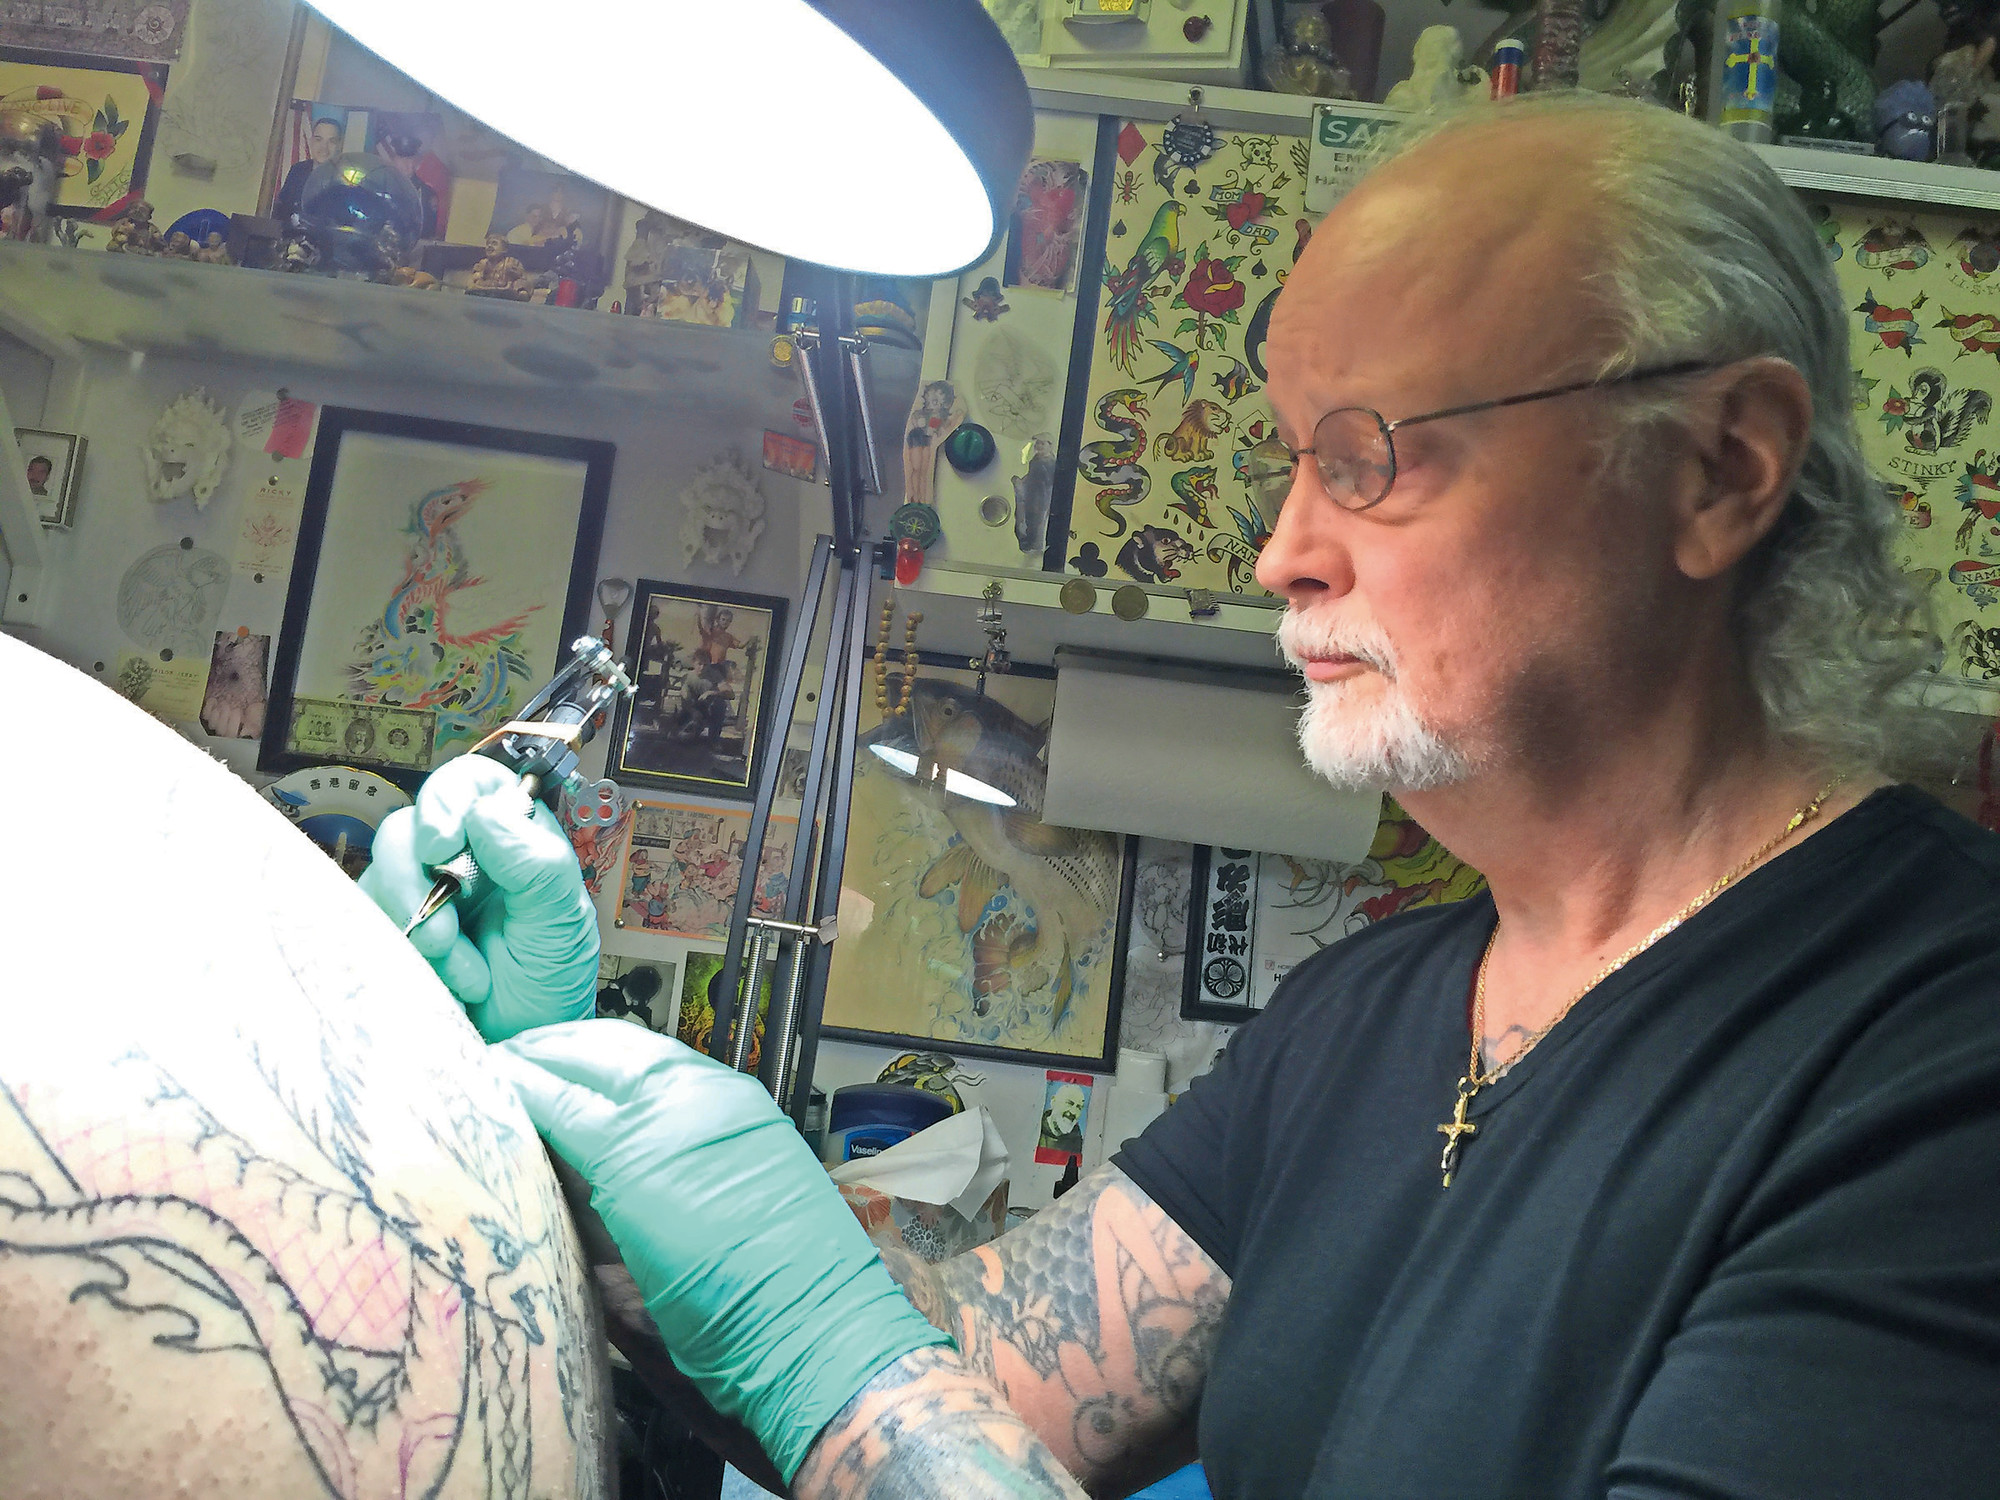 Richie Montgomery took over Long Island Tattoo from Peter Poulos in 1975. He has since renamed the business and moved it east on Hempstead Turnpike twice — once in 1986 and then in 1997, to 1548 Hempstead Turnpike, where he has been ever since